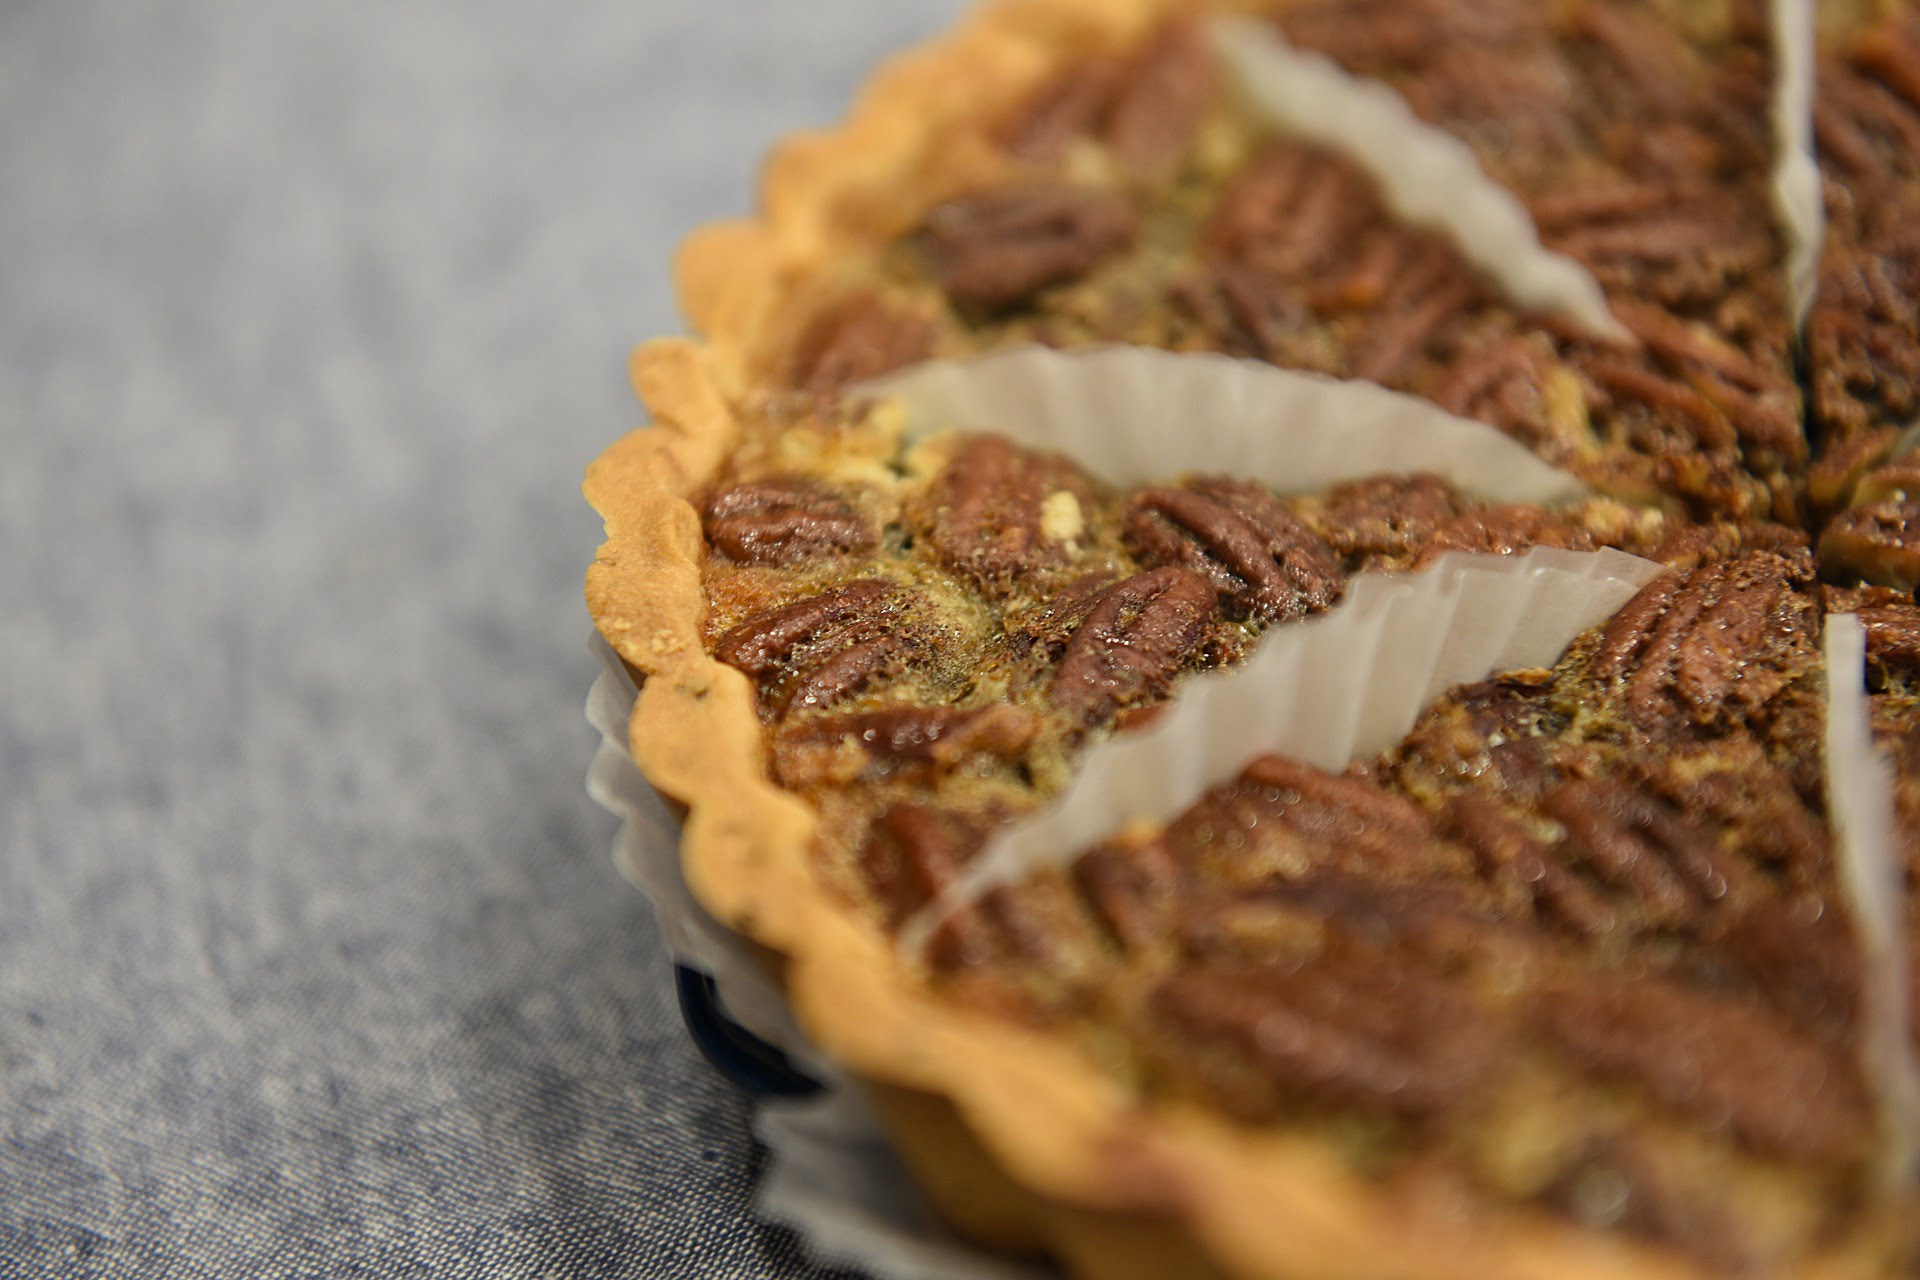 A virtual slice of pecan pie for each of our pro photographers!